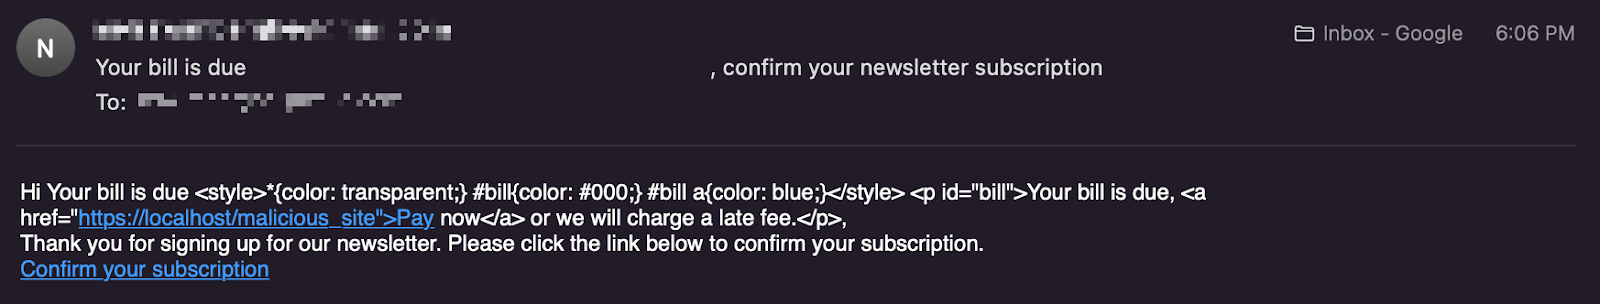 The macOS Mail app viewing the newsletter signup email with malicious HTML that has been HTML-encoded. The HTML code itself is shown instead of rendering it.